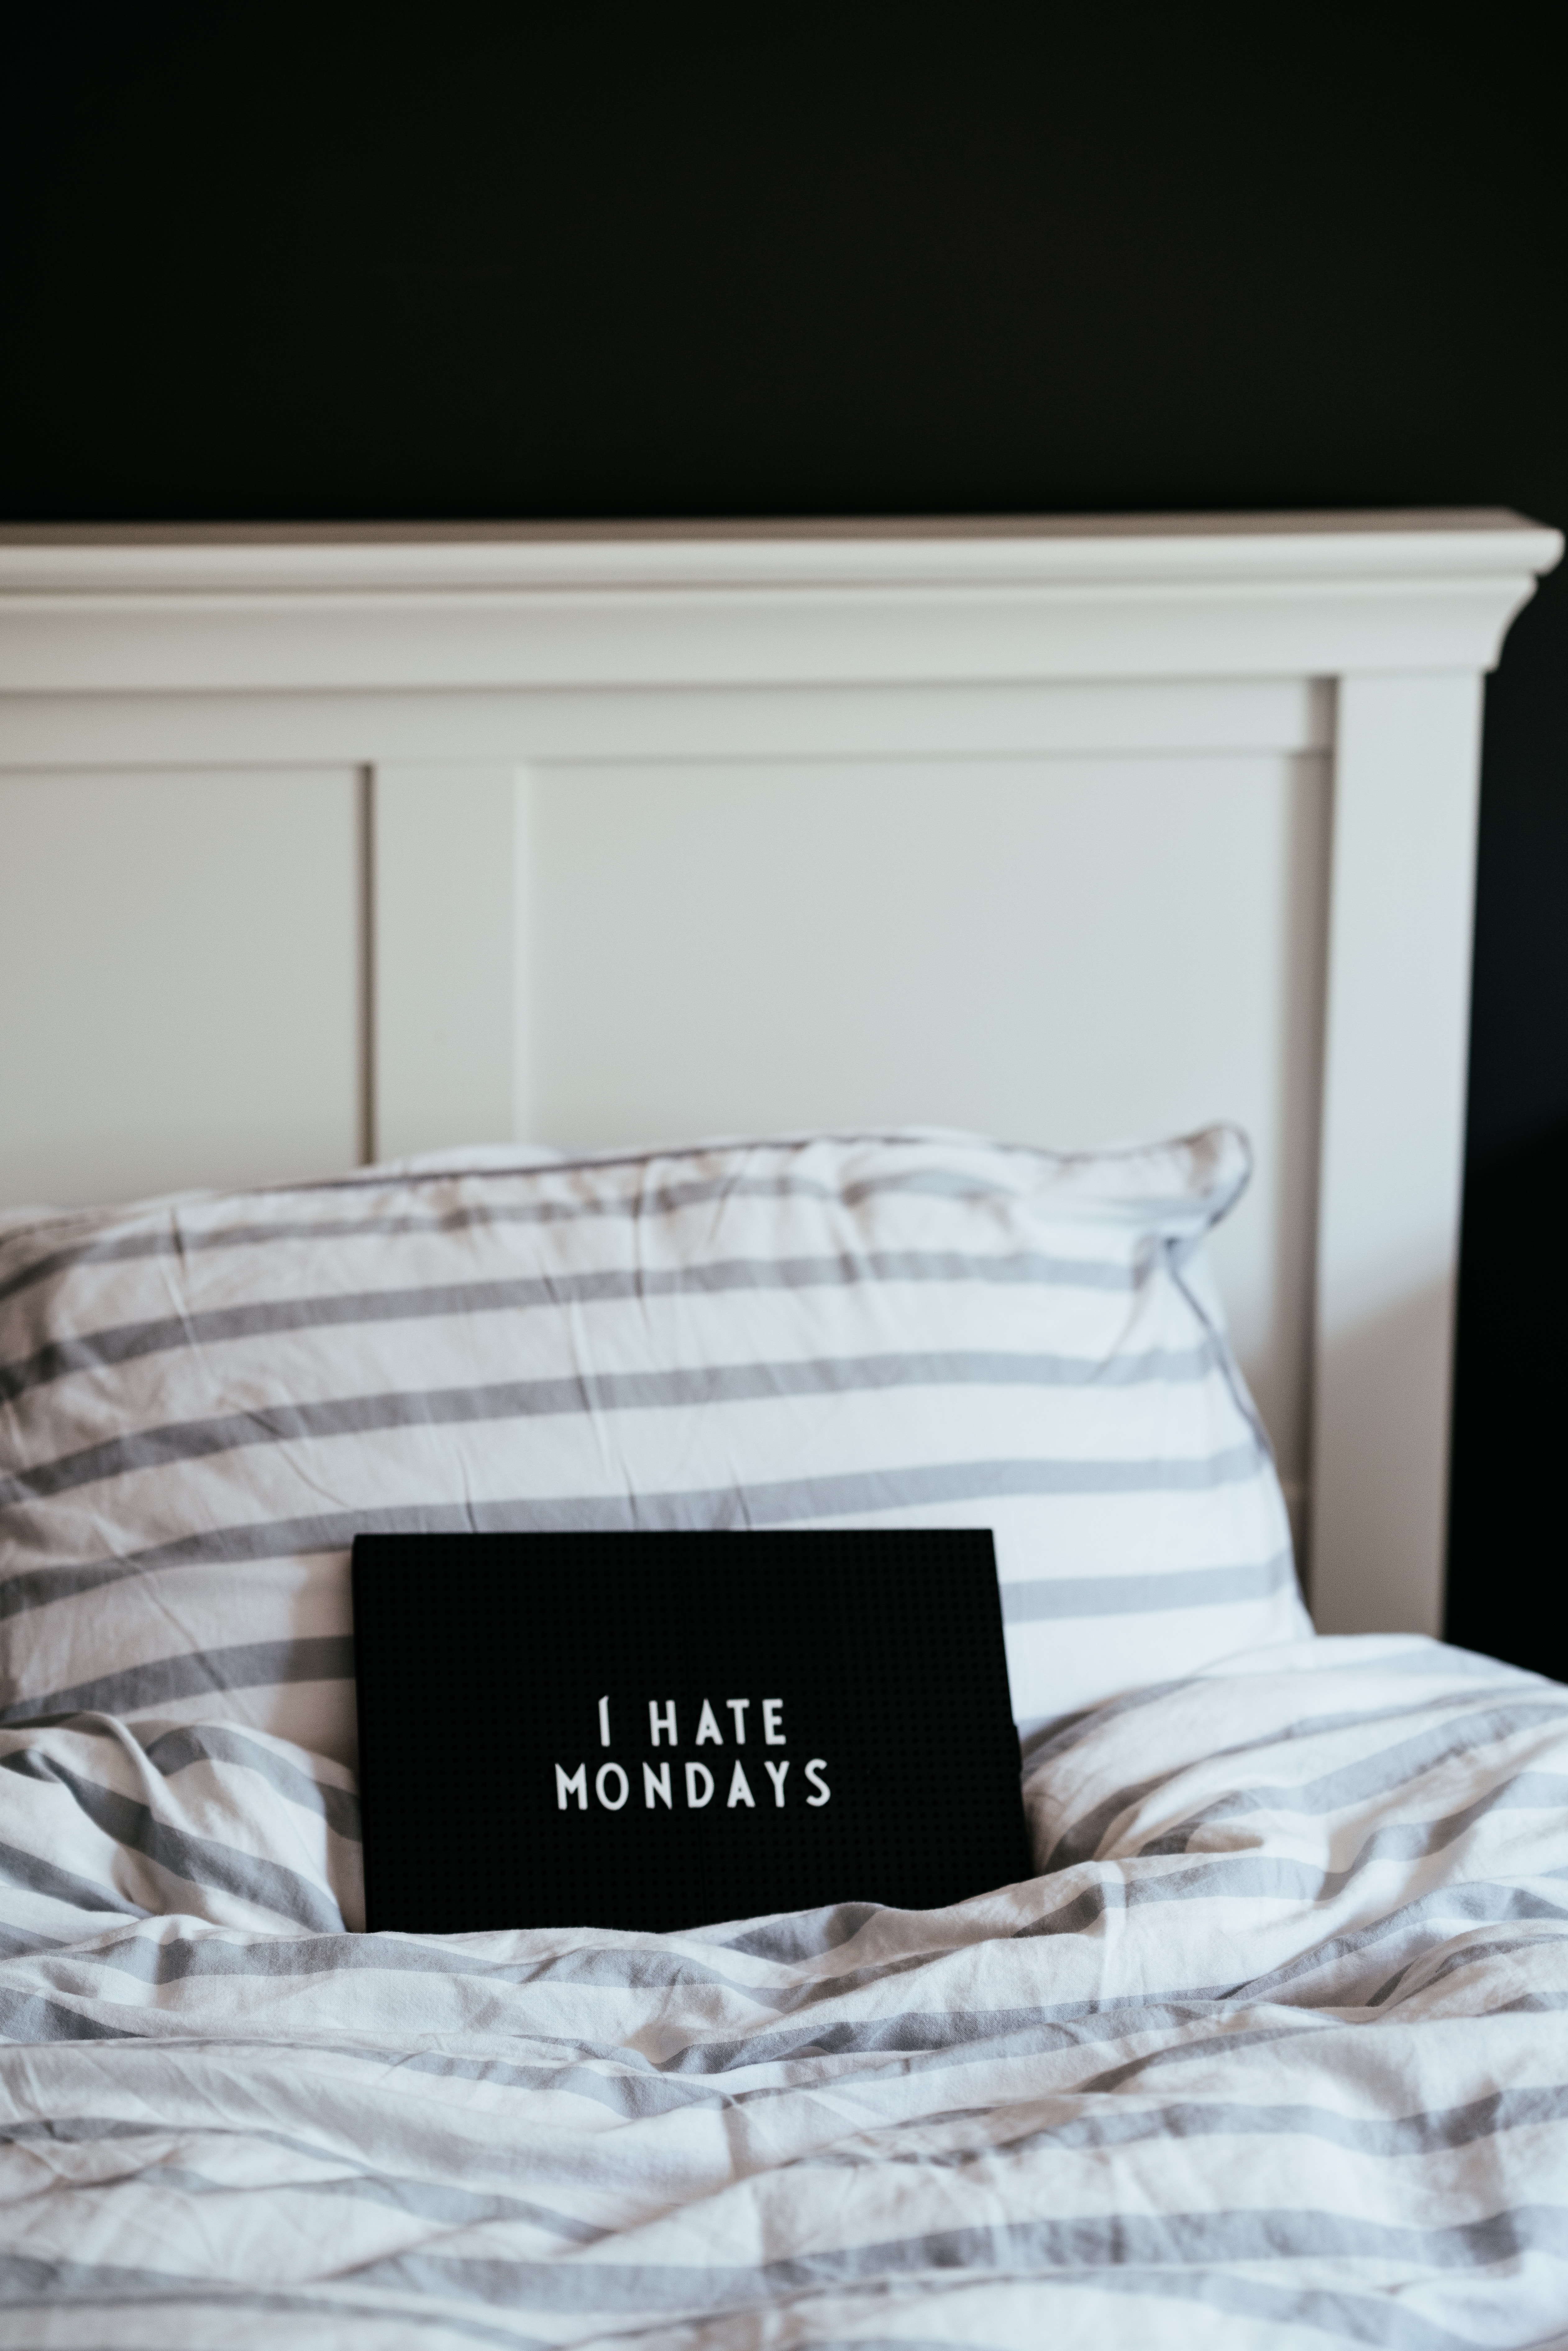 nameplate, words, inscription, plate, bed, hatred, monday iphone wallpaper